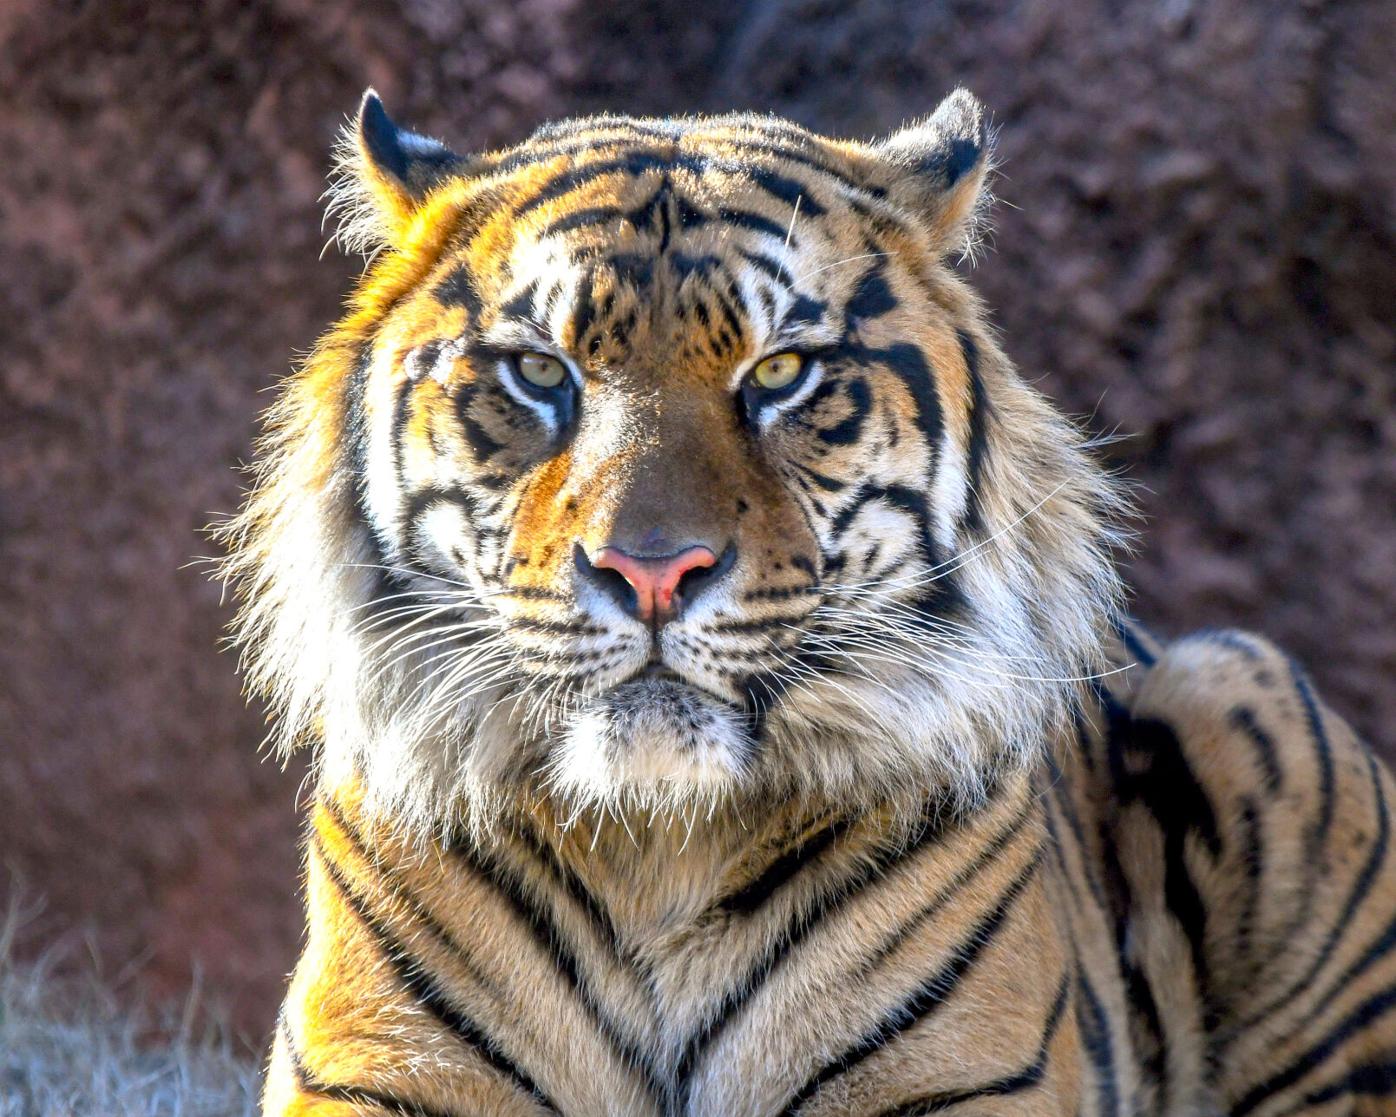 Safari Park welcomes 2 Sumatran tiger cubs in time for World Tiger Day